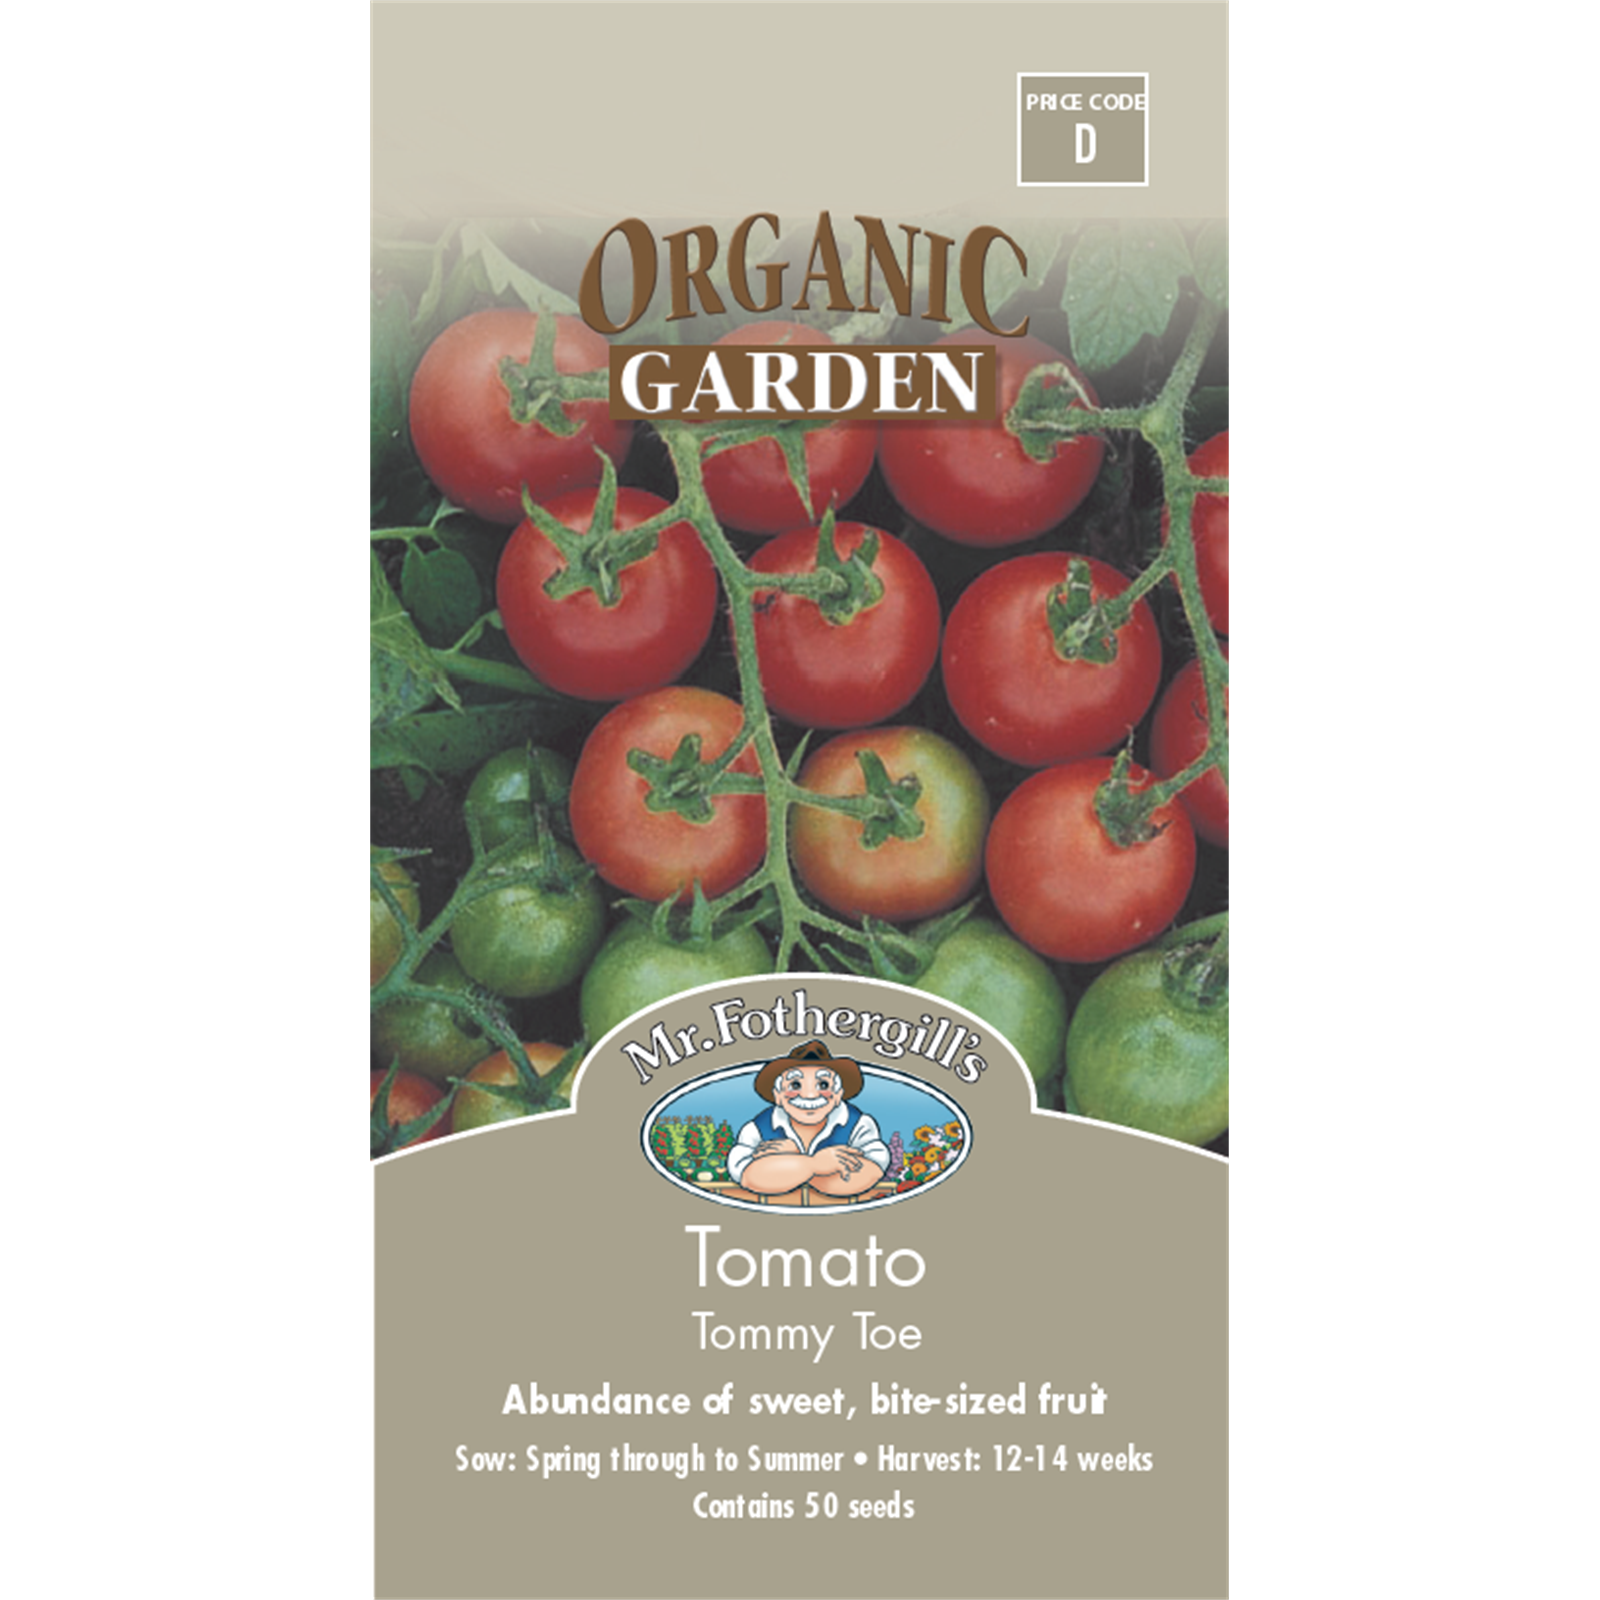 Mr Fothergill's Tommy Toe Tomato Seeds